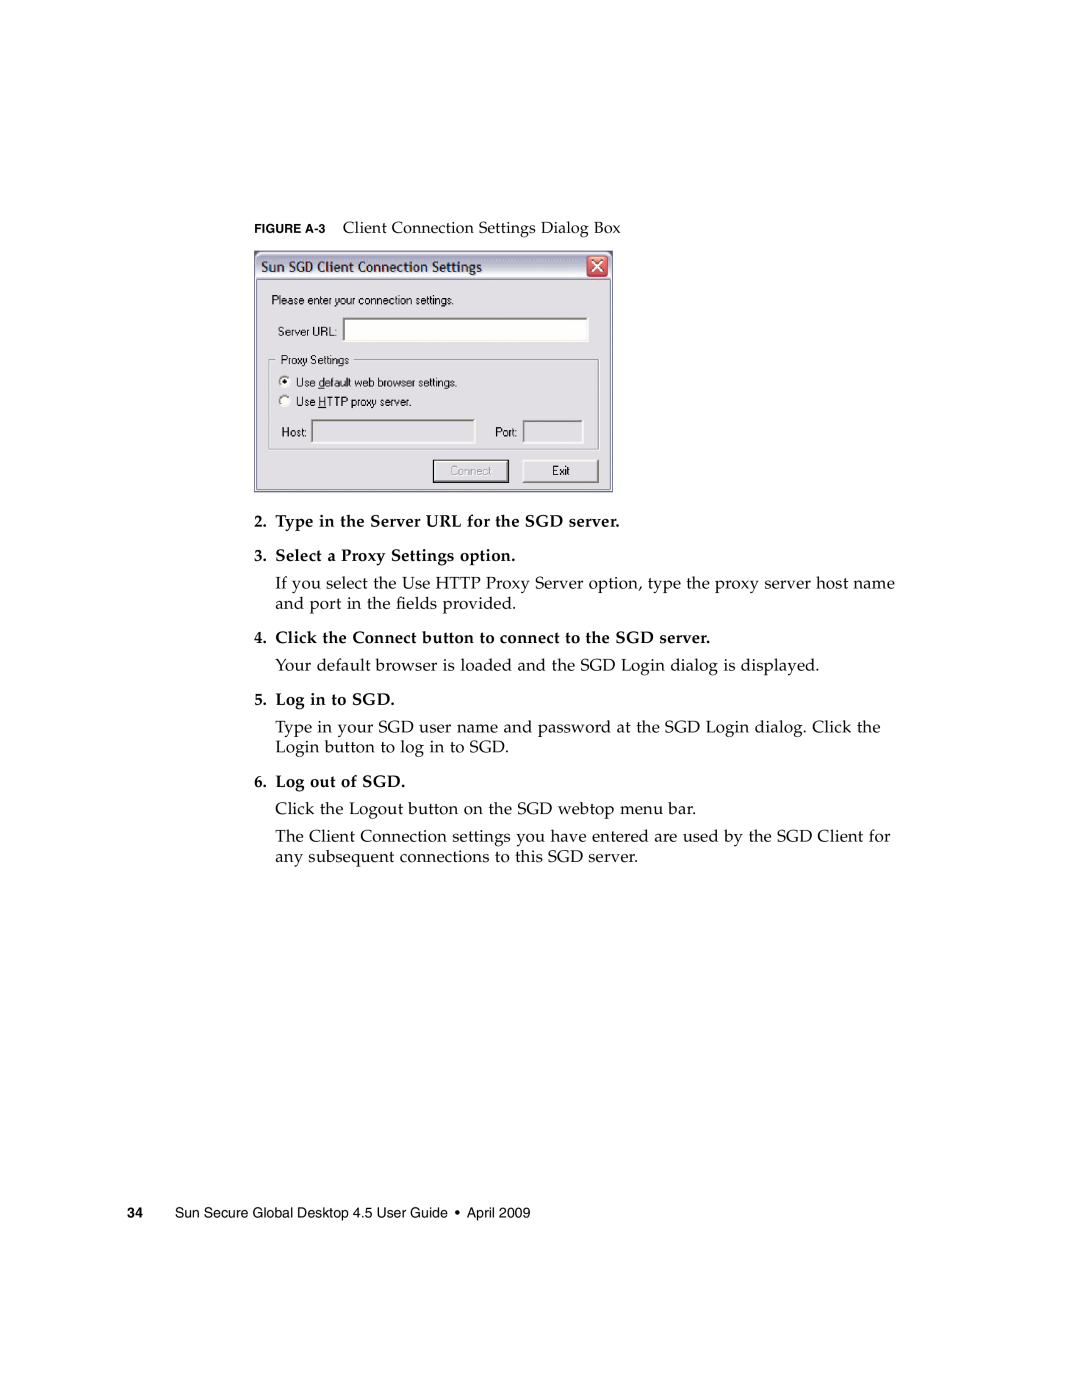 Sun Microsystems 4.5 manual Type in the Server URL for the SGD server, Select a Proxy Settings option, Log in to SGD 